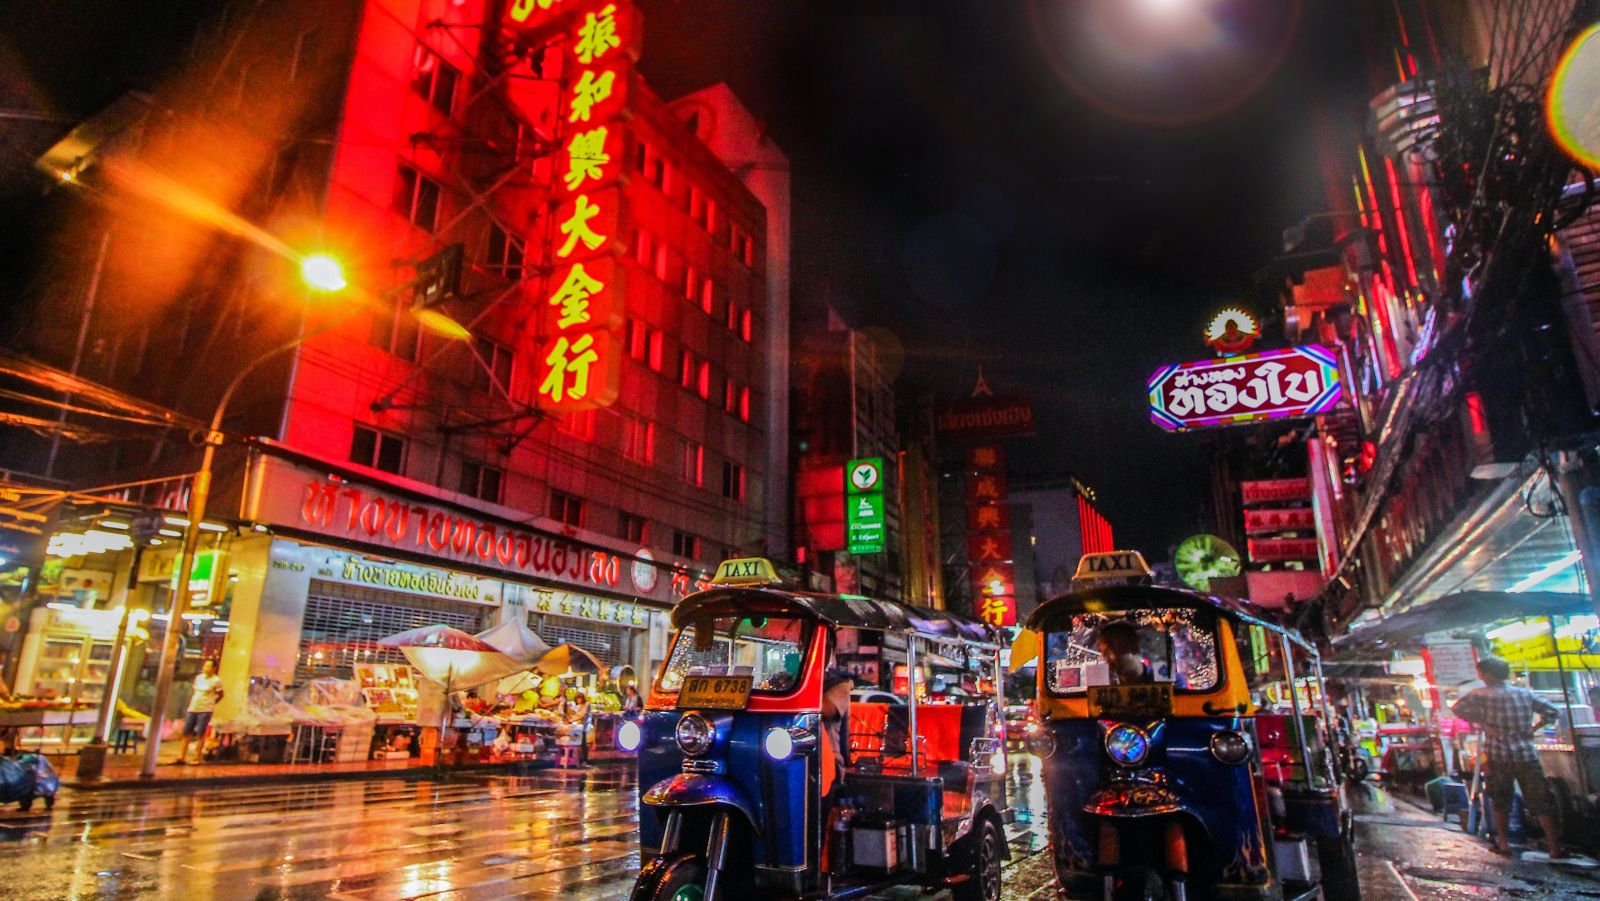 an image of chinatown area in thailand captured in a way that potrays the vibrant night life there